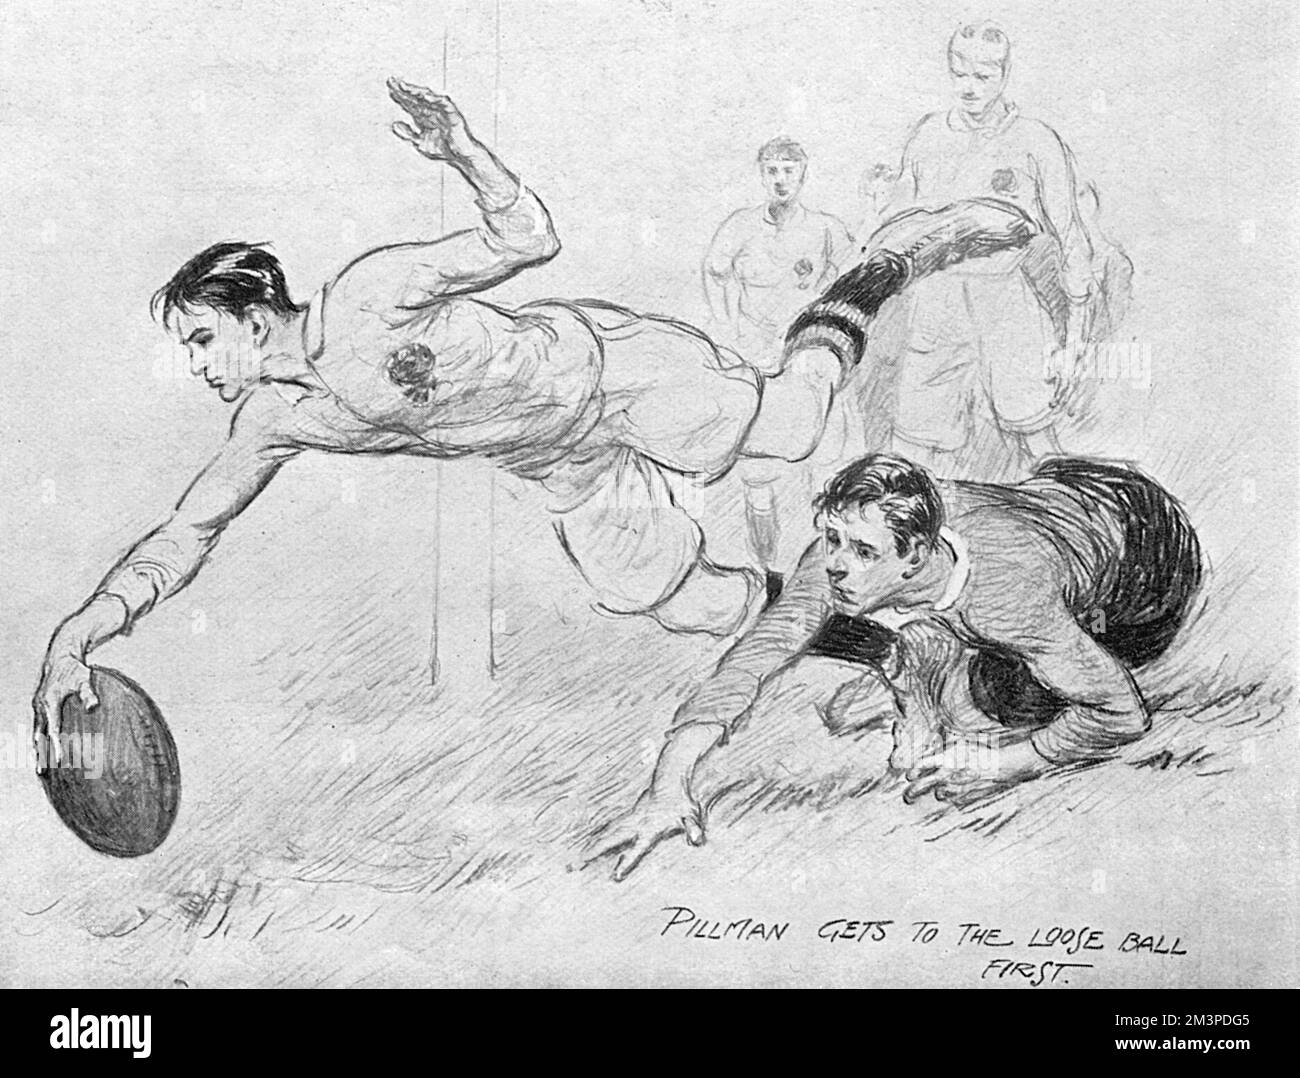 A scene from the England v Wales rugby union match at Twickenham, won 10-9 by England, in the Five Nations Championship. Here, Charles Pillman scores England's second try, winning a chase to the ball.     Date: 17 January 1914 Stock Photo